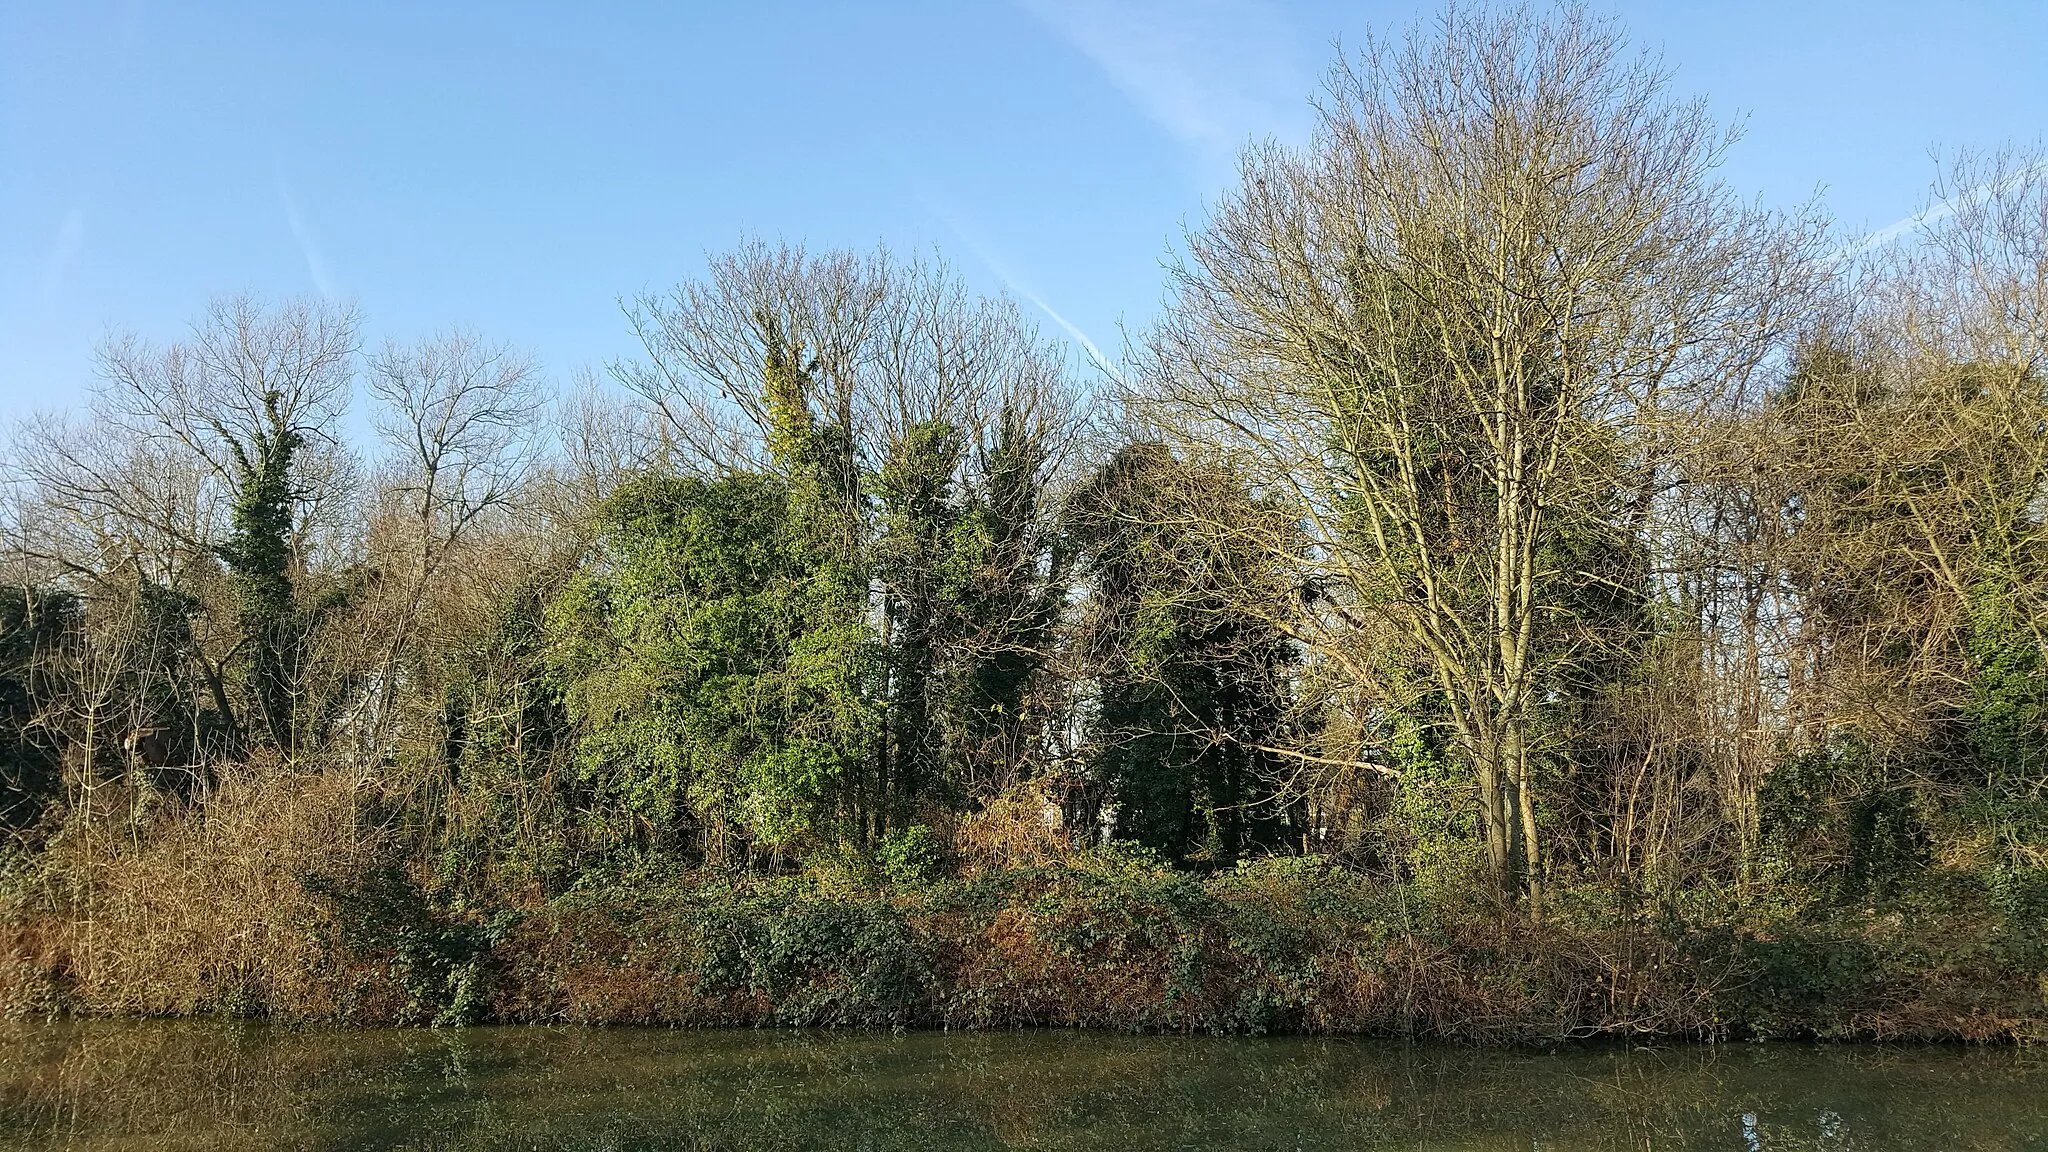 Photo showing: , an island in the River Thames off the shore of Sunbury, Surrey. Despite the name it is not accessible directly from Sunbury, other than by a footbridge to Wheatley's Aitwhich is closed to the public. A public footbridge connects the island to the south bank of the Thames near Walton on Thames.